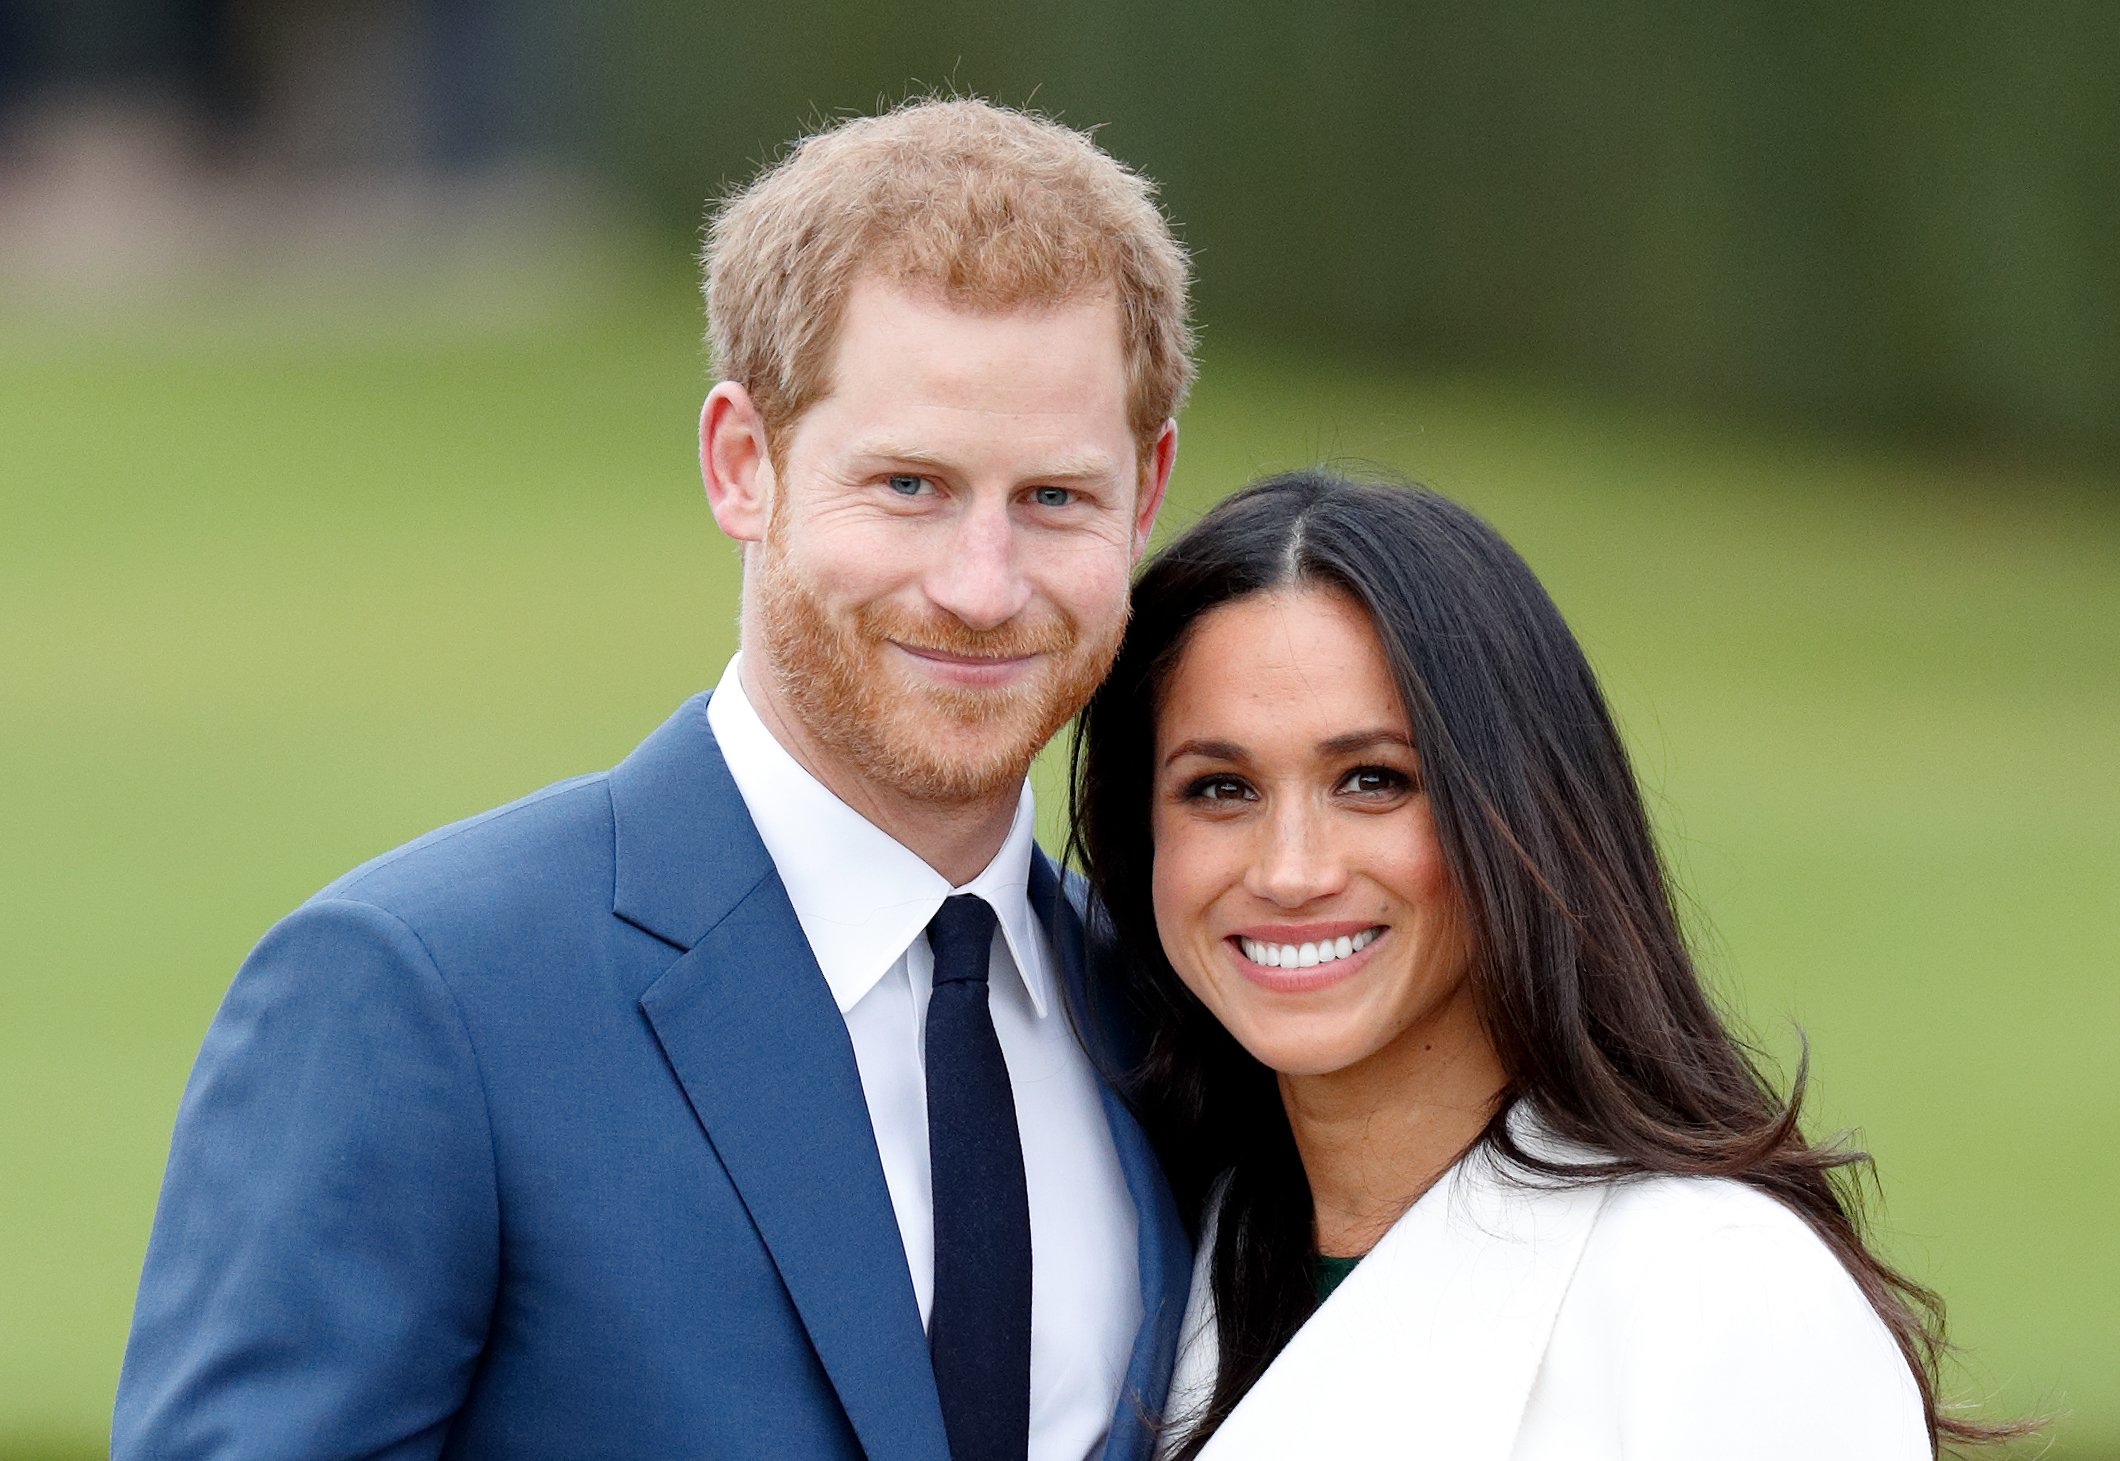 Prince Harry and Meghan Markle attend an official photocall to announce their engagement at The Sunken Gardens, Kensington Palace on November 27, 2017 in London, England | Photo: Getty Images